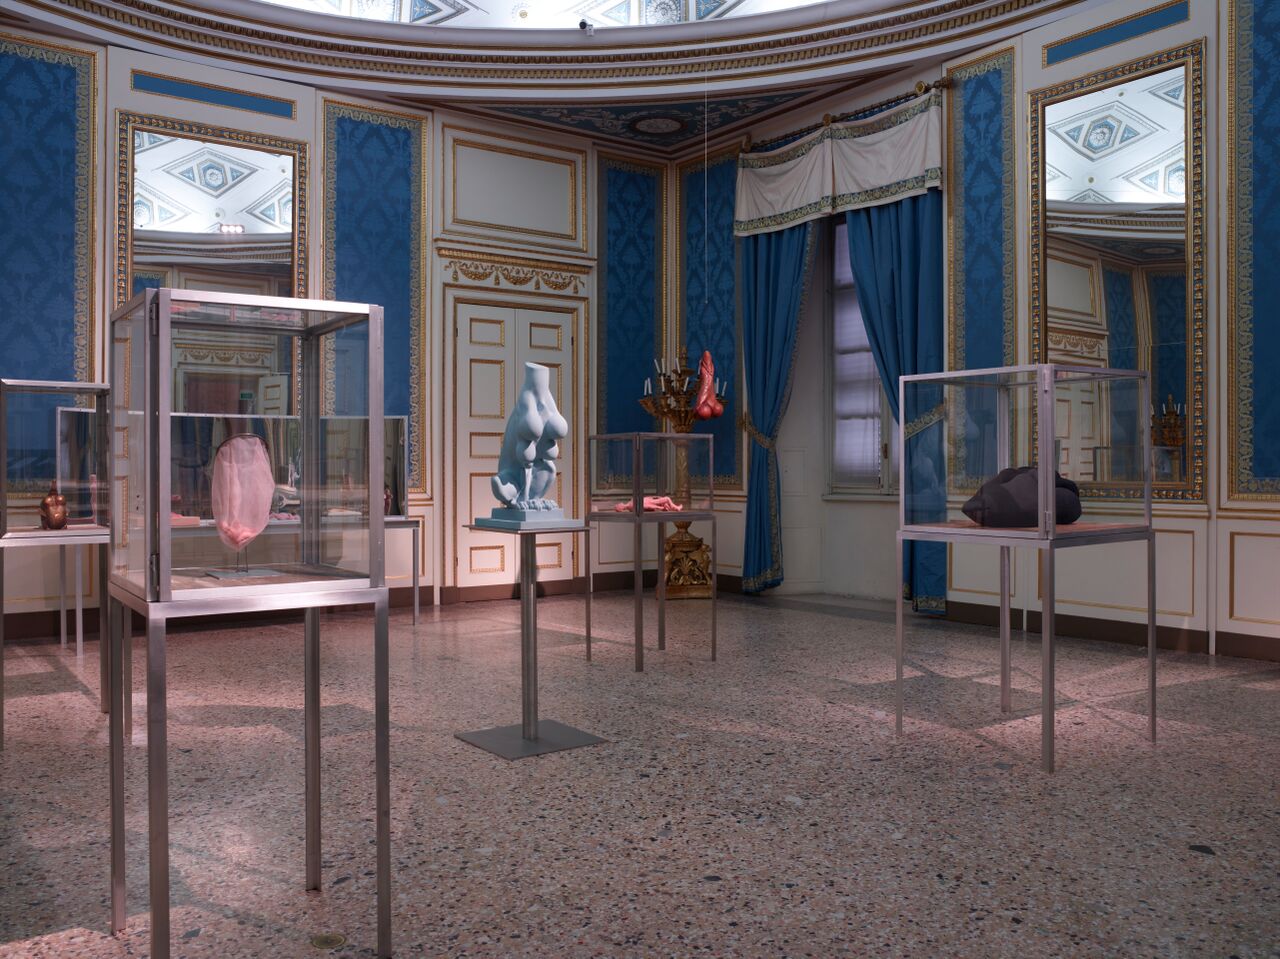 Installation view of Louise Bourgeois's works in one of the domed halls.  Image: Marco De Scalzi. Courtesy Palazzo Reale.